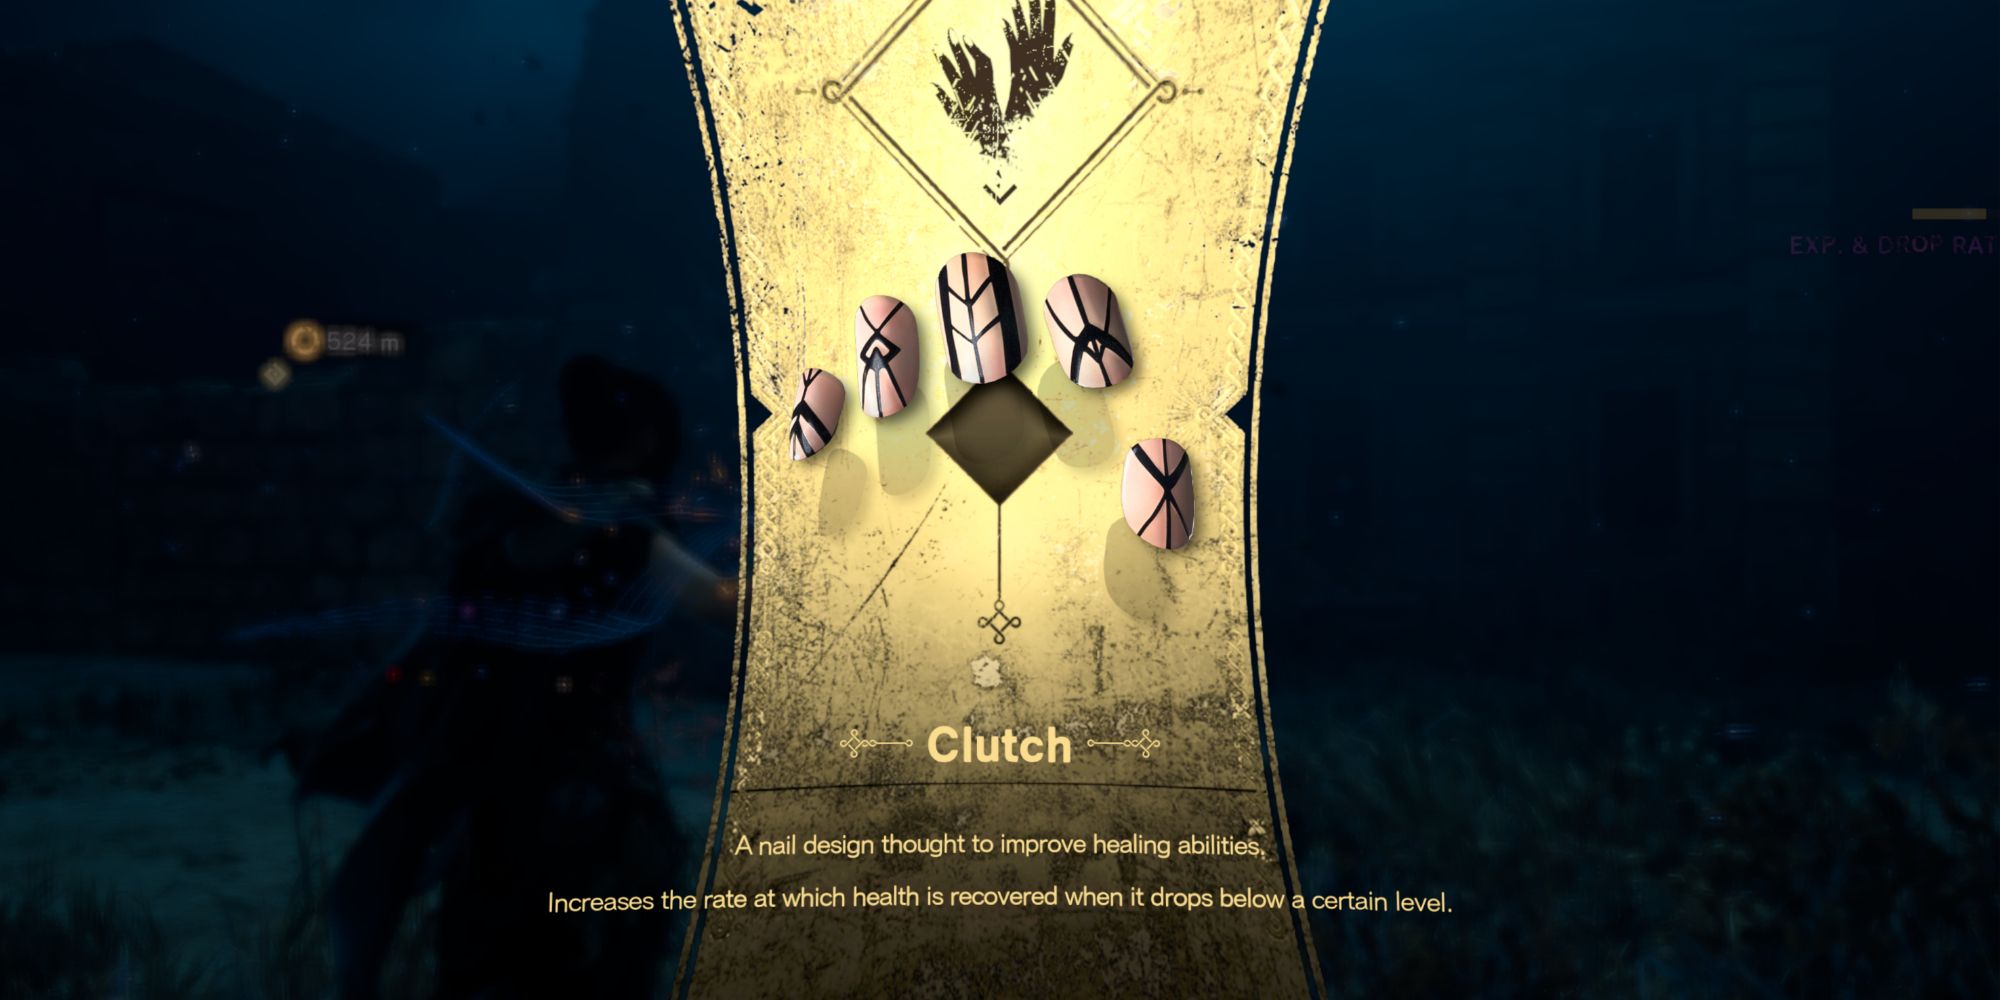 Forspoken - Acquiring the Clutch nail design